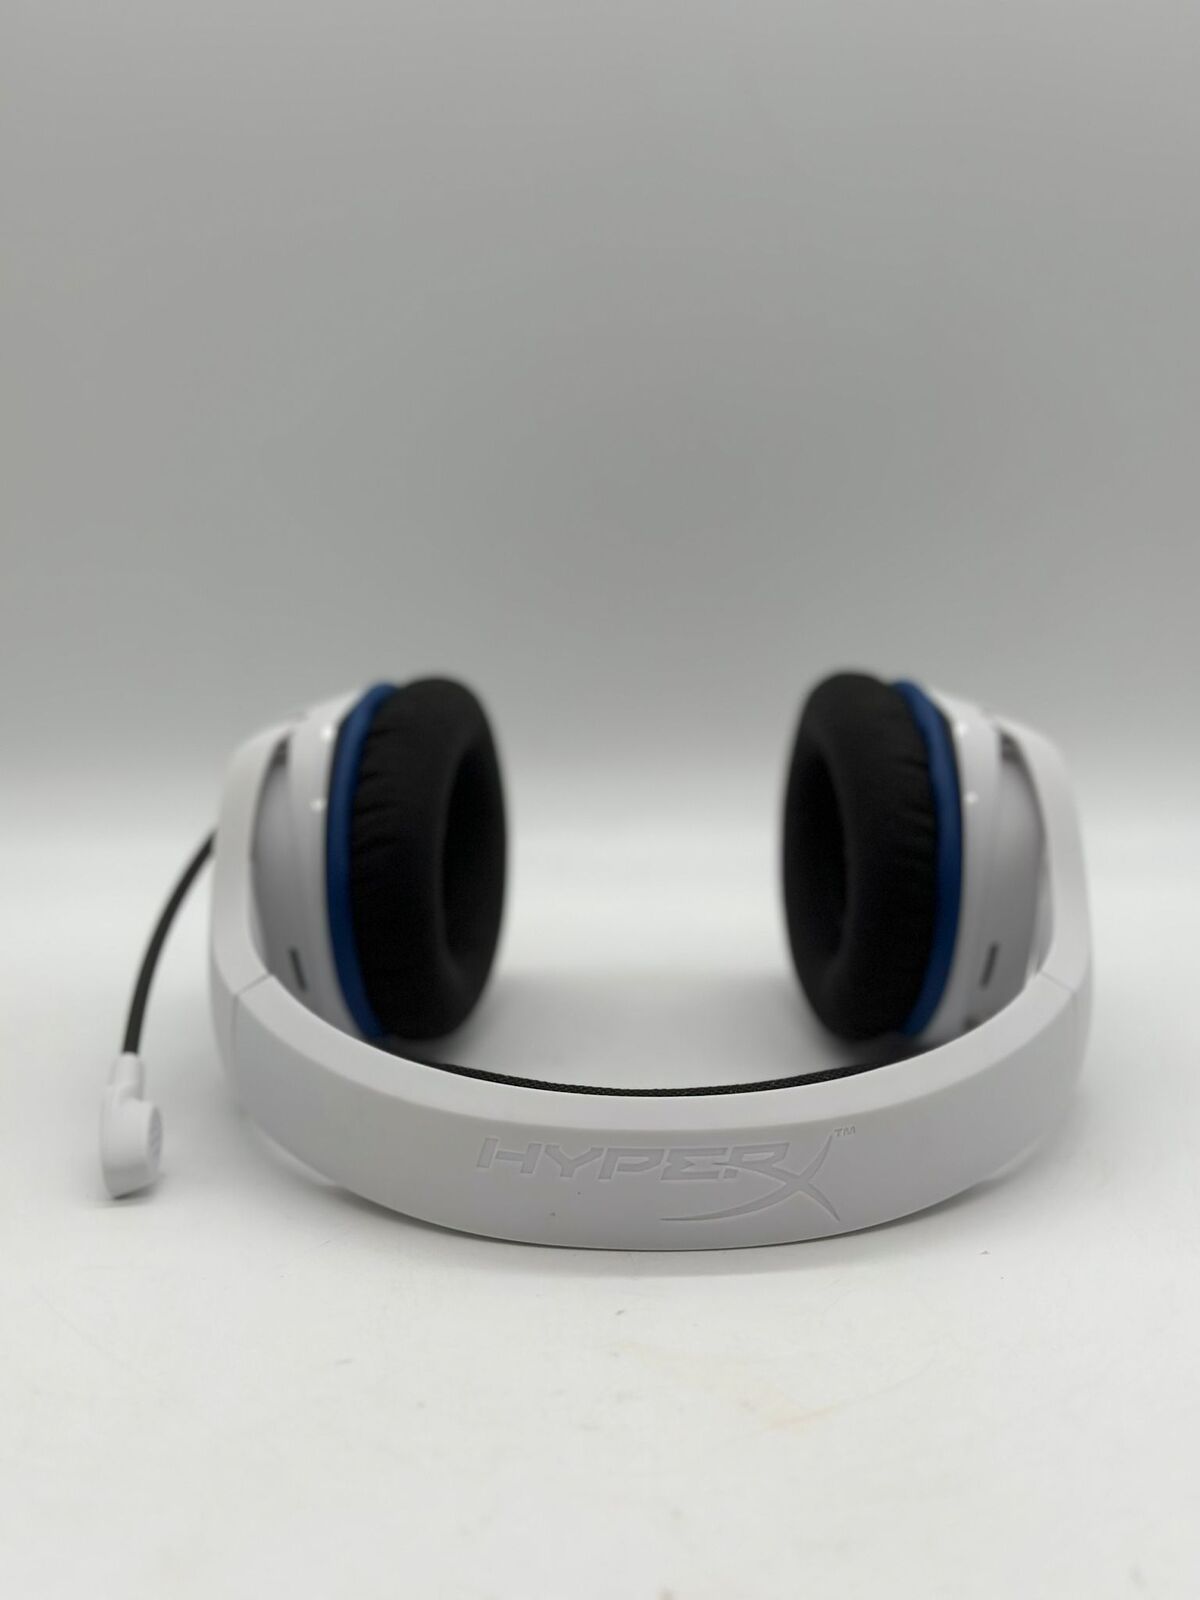 (Pre-Owned) HyperX Gaming White Wireless Cloud Stinger Headset Core